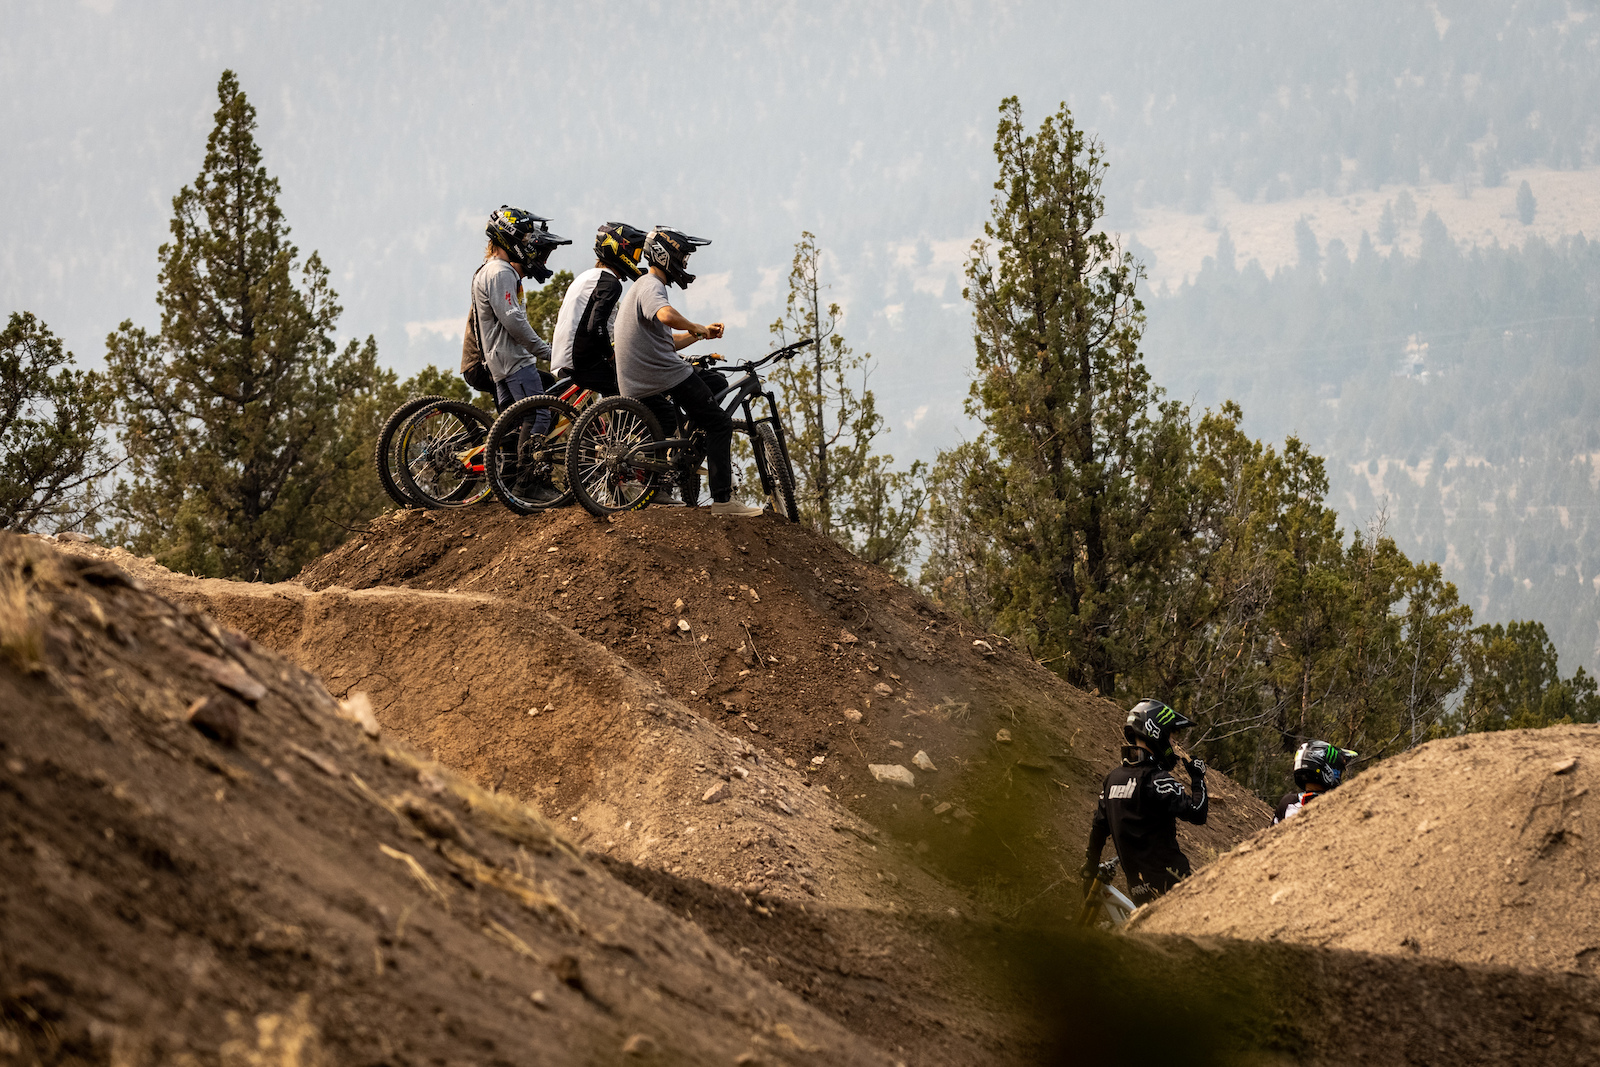 The comradery between the contestants is what makes events like Proving Grounds so special - it s about helping each other out and bettering one another through support. Long live freeride.